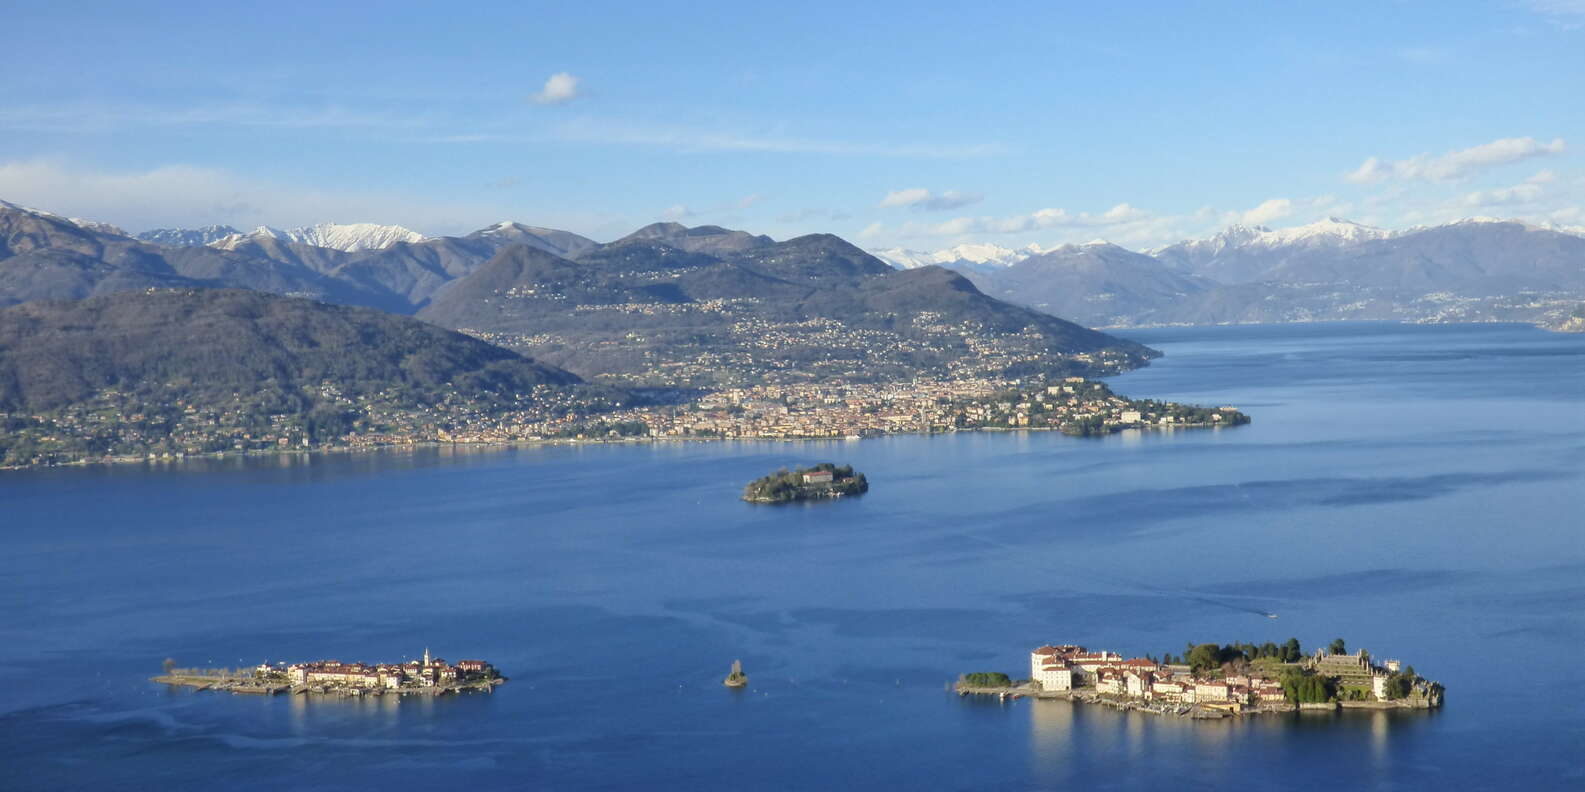 What to do in Stresa